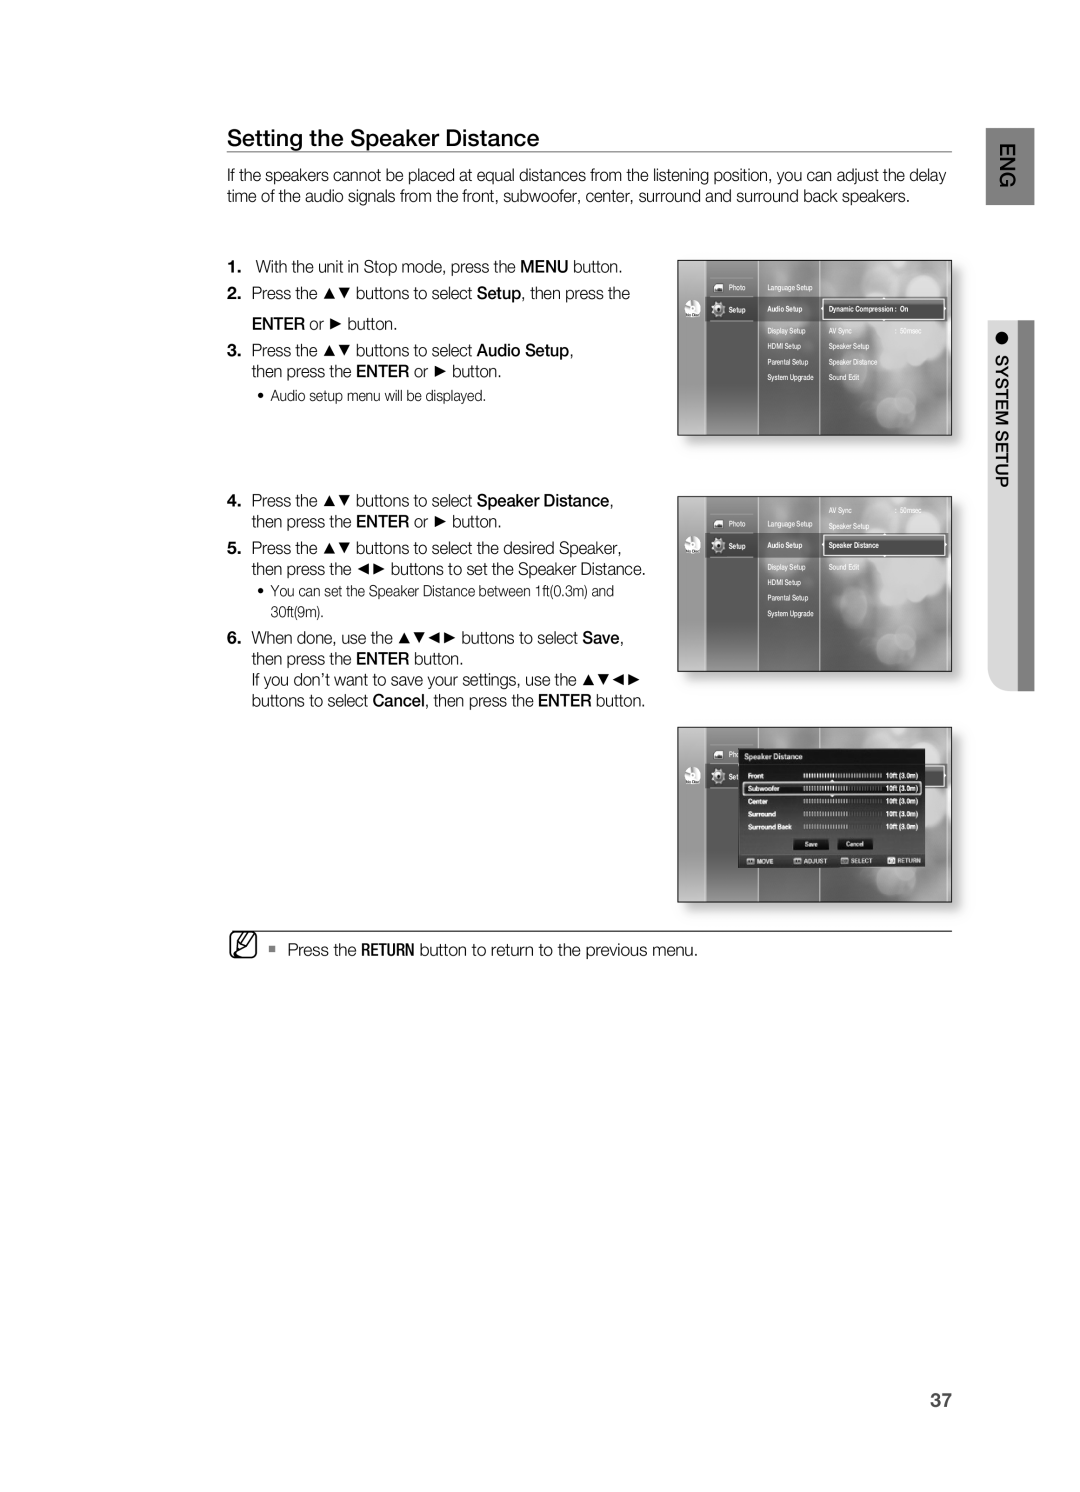 Samsung AH68-02019S manual Setting the Speaker Distance, EnTER or + button, Press the $% buttons to select Audio Setup 